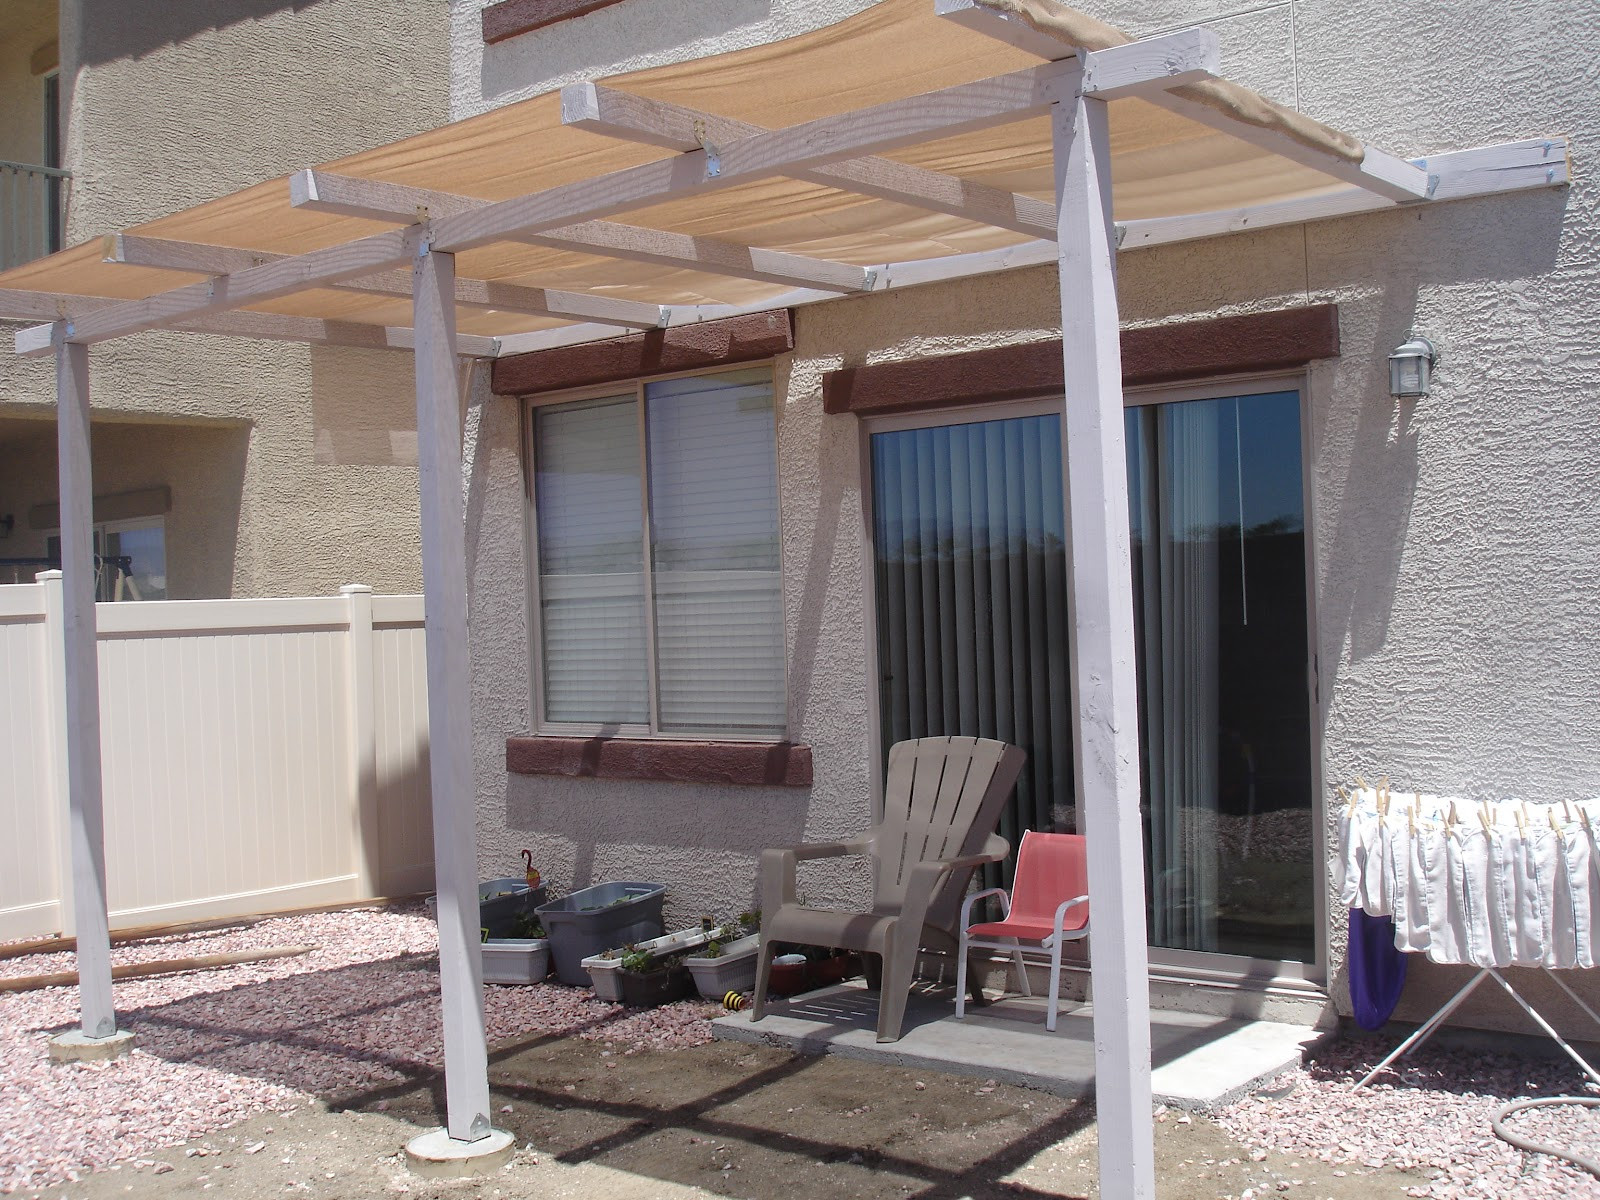 DIY Outdoor Covered Patio
 Alex Haralson Update Our DIY Patio Cover